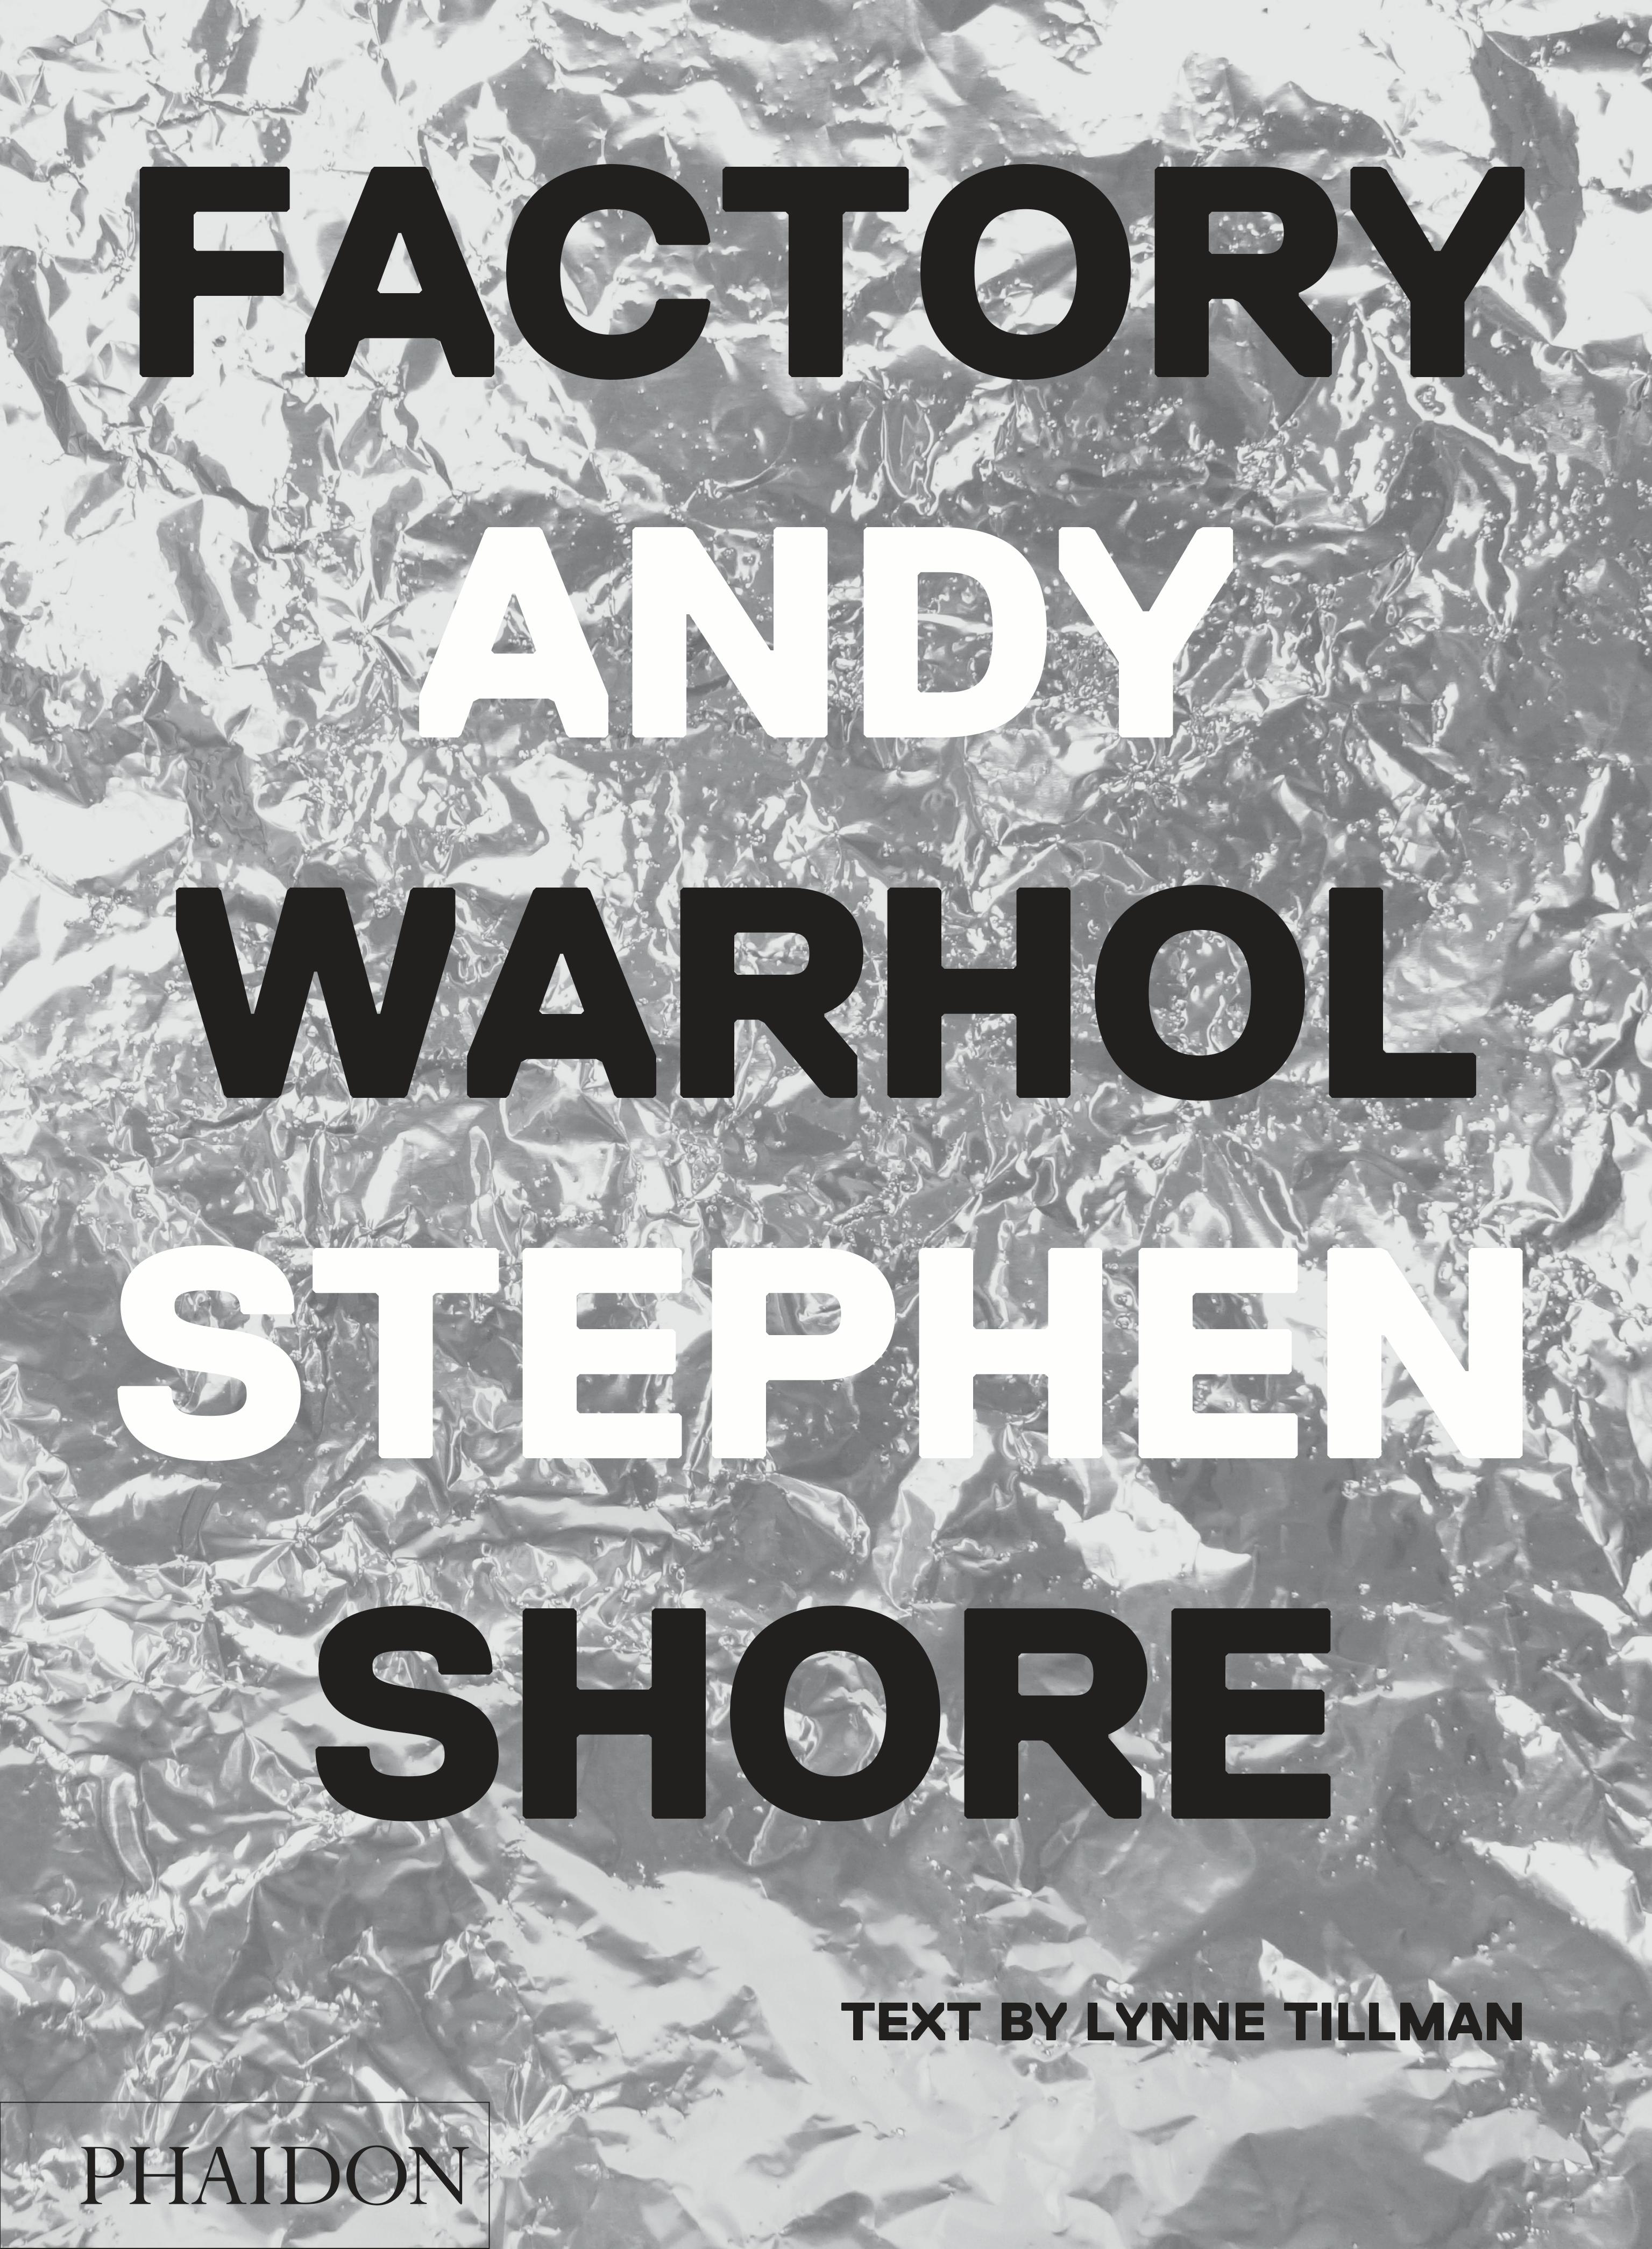 Paper Stephen Shore Factory, Andy Warhol Photobook For Sale